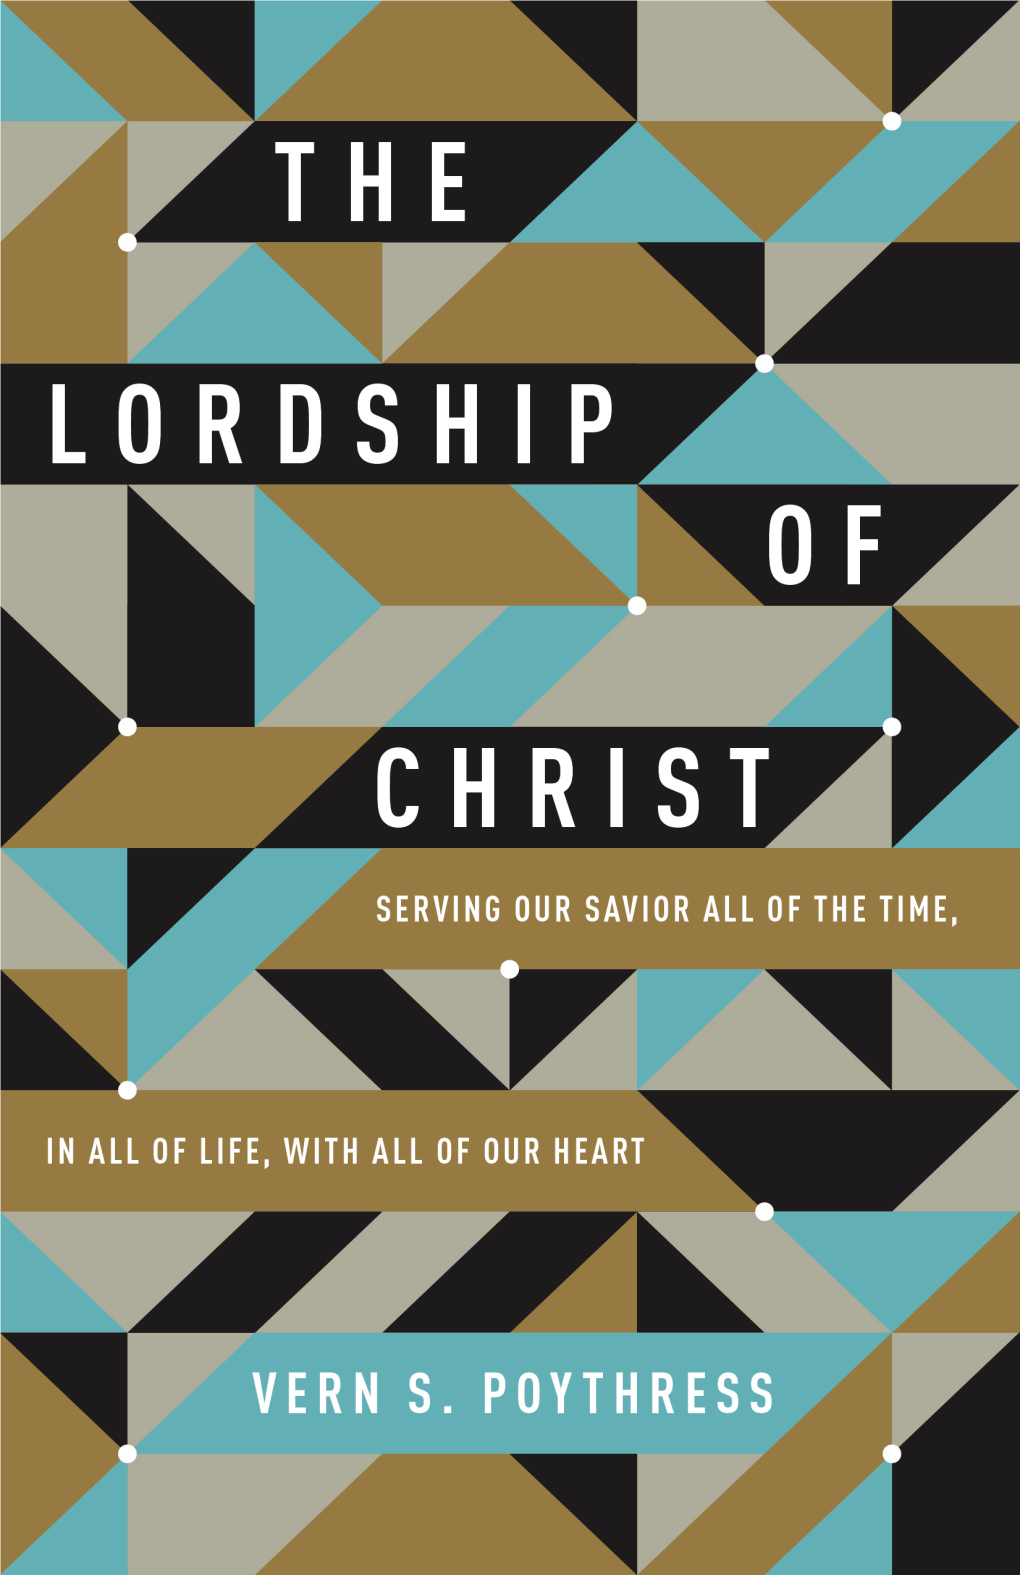 The Lordship of Christ: Serving Our Savior All of the Time, in All of Life, with All of Our Heart Copyright © 2016 by Vern S